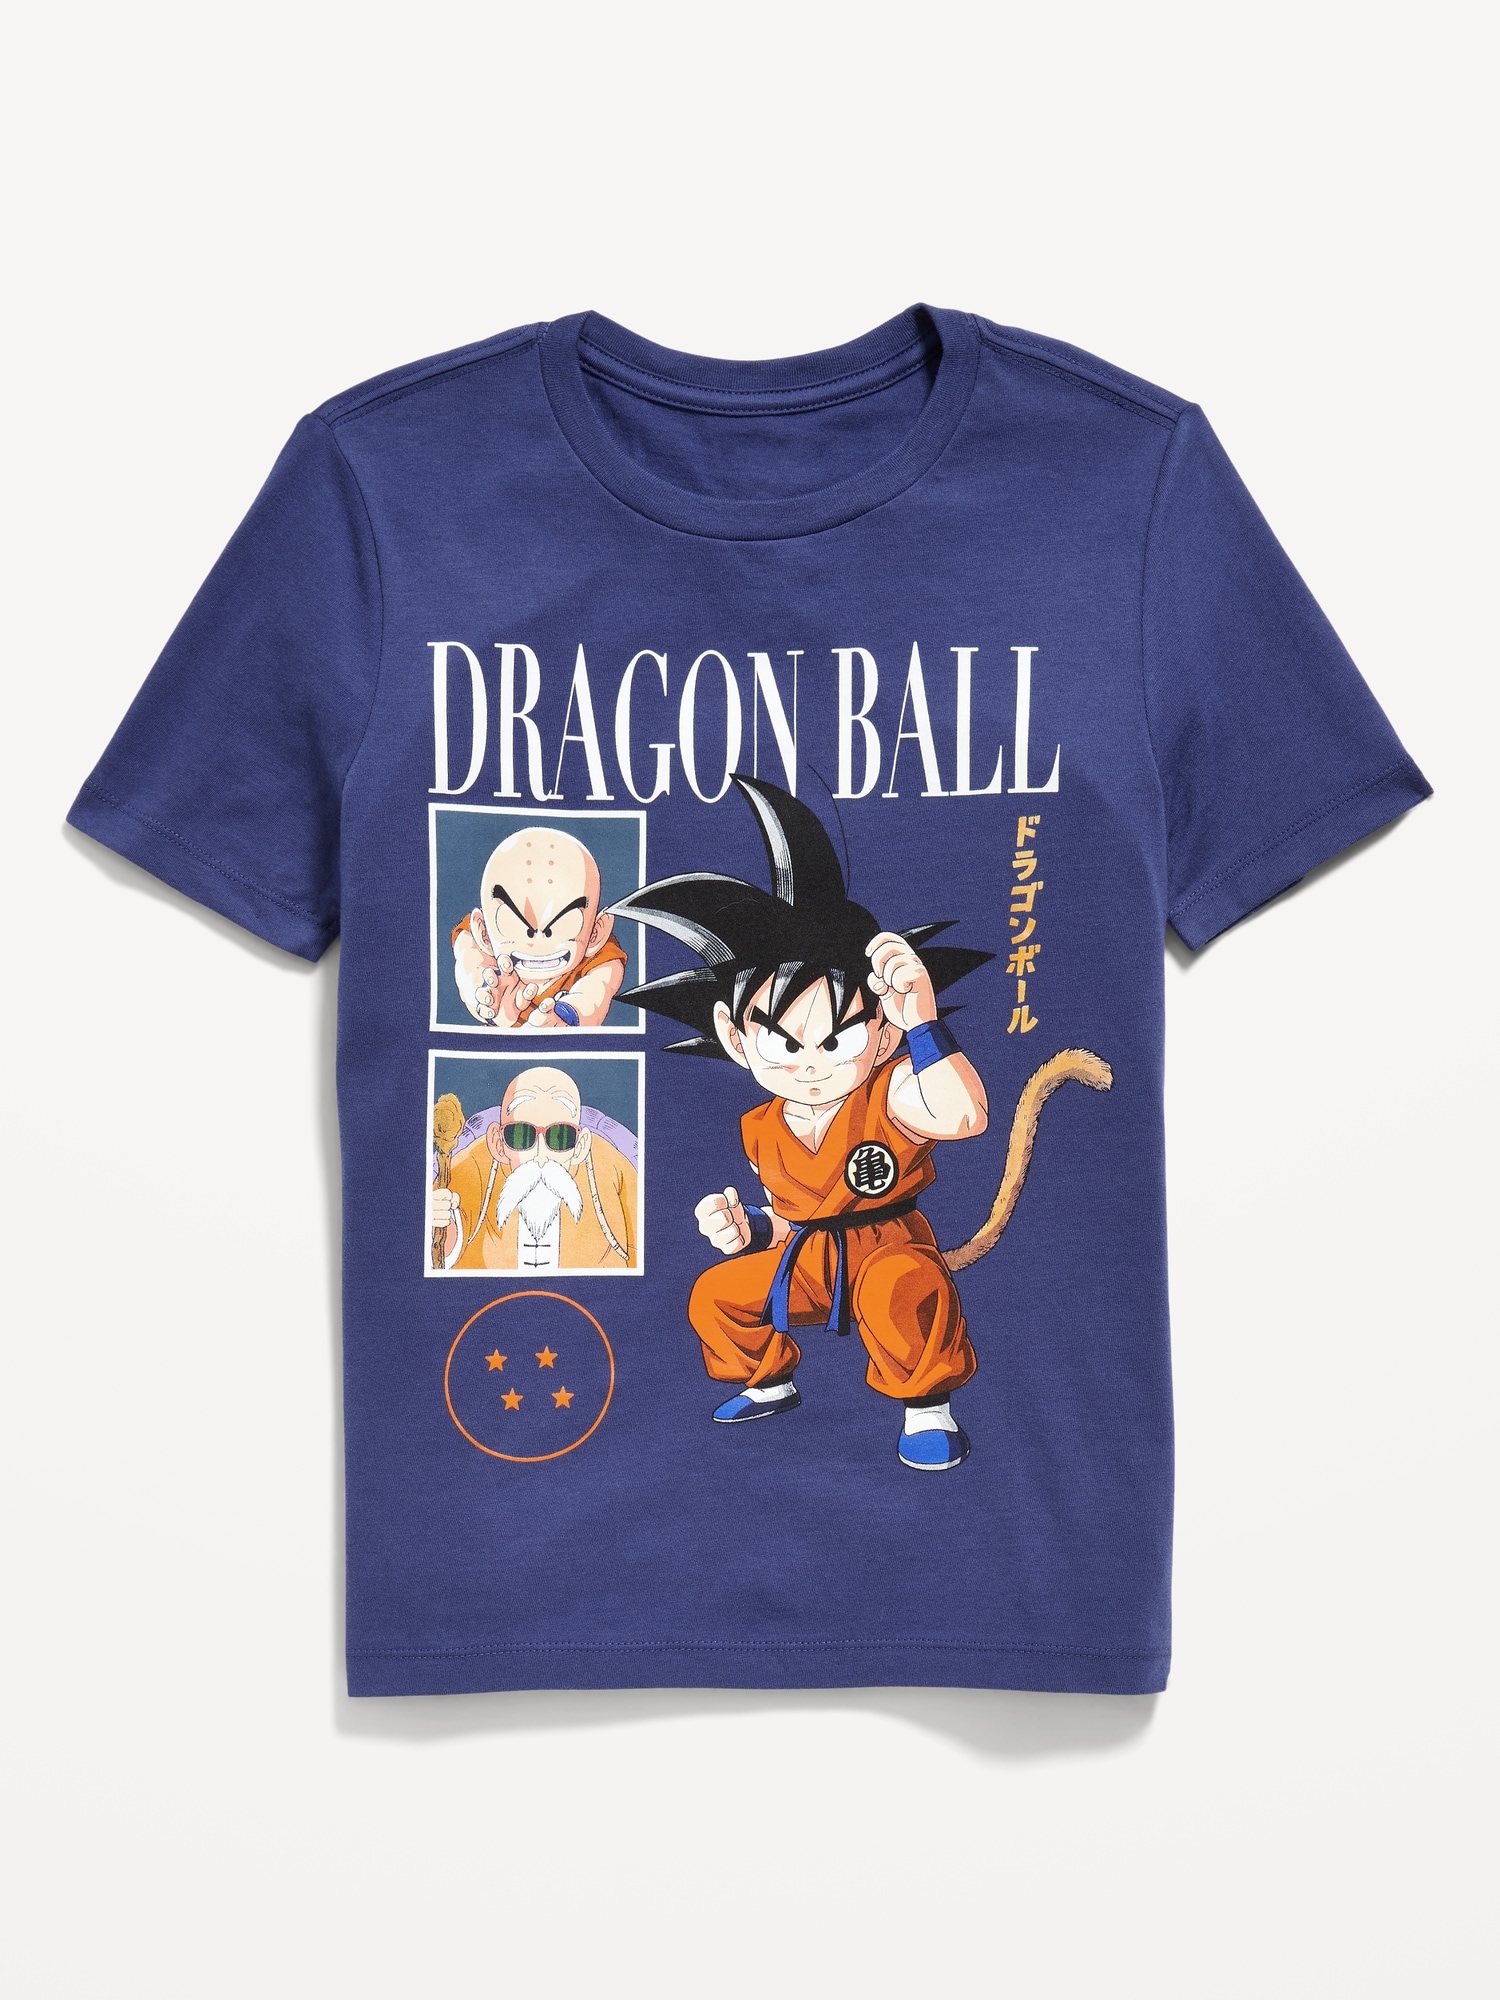 Dragon Ball™ Gender-Neutral Graphic T-Shirt for Kids